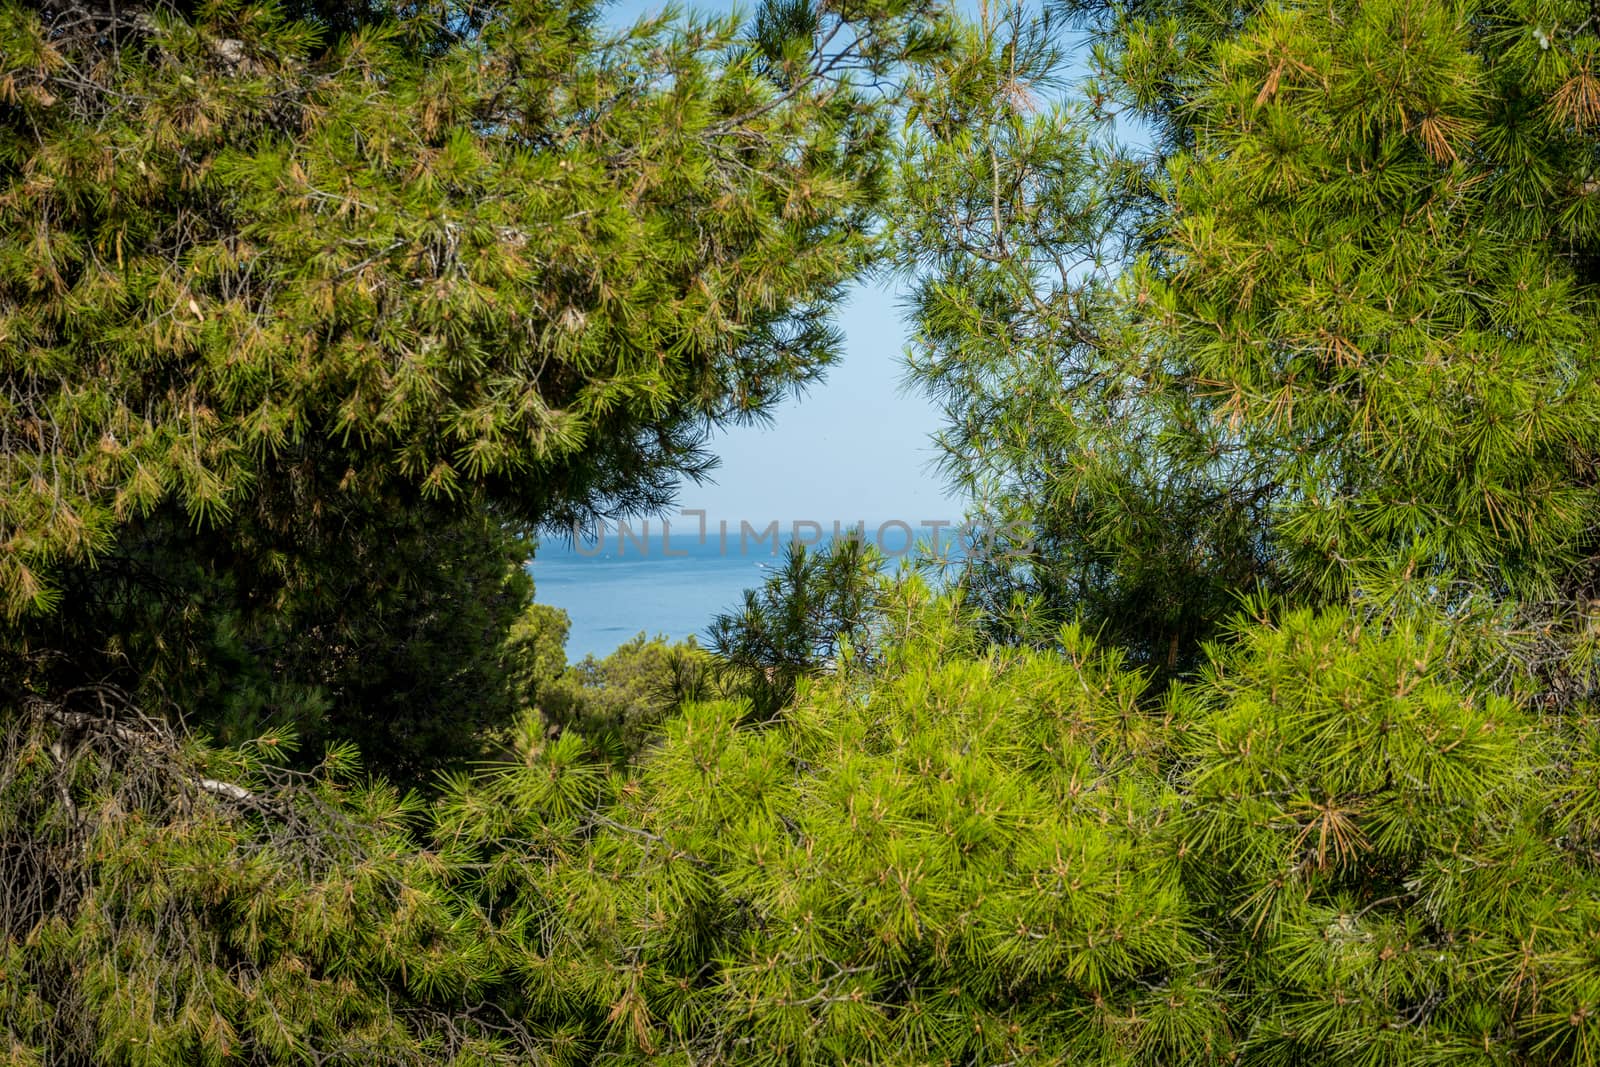 The Sea viewed through the gap between the trees in Malaga, Spai by ramana16